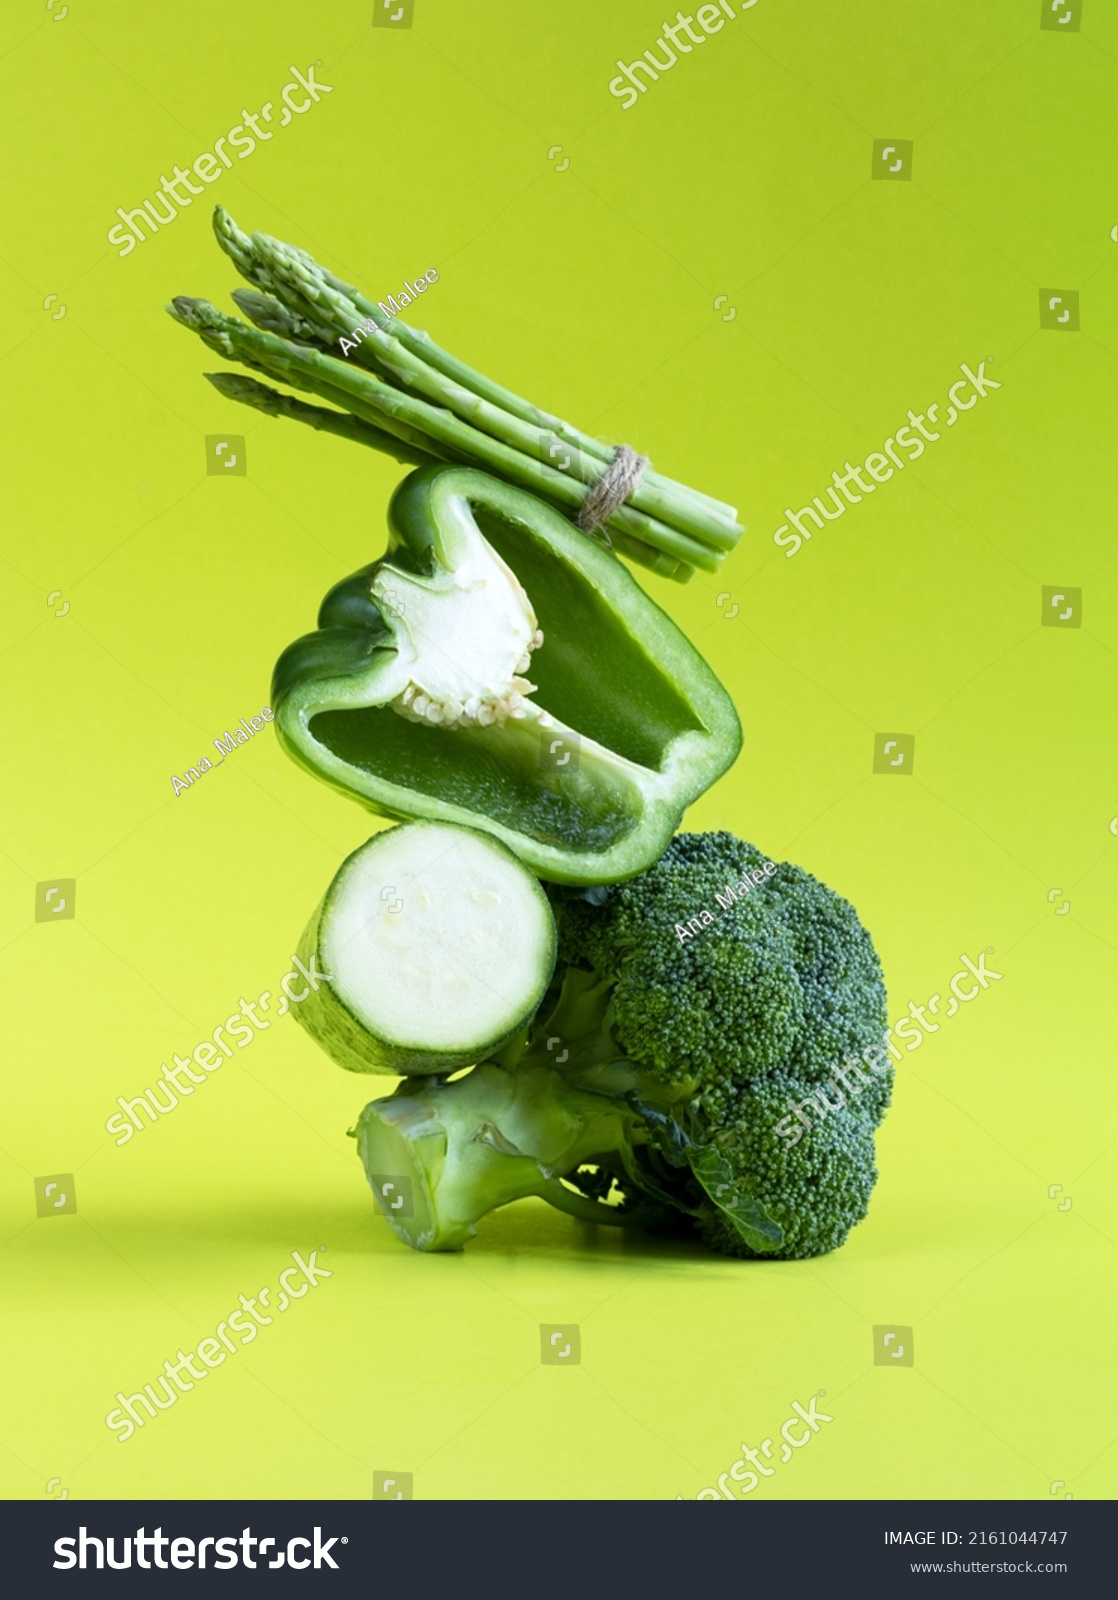 Fresh green vegetables balance on the table. Equilibrium floating food balance of broccoli, bell pepper, zucchini and asparagus on a green background #2161044747